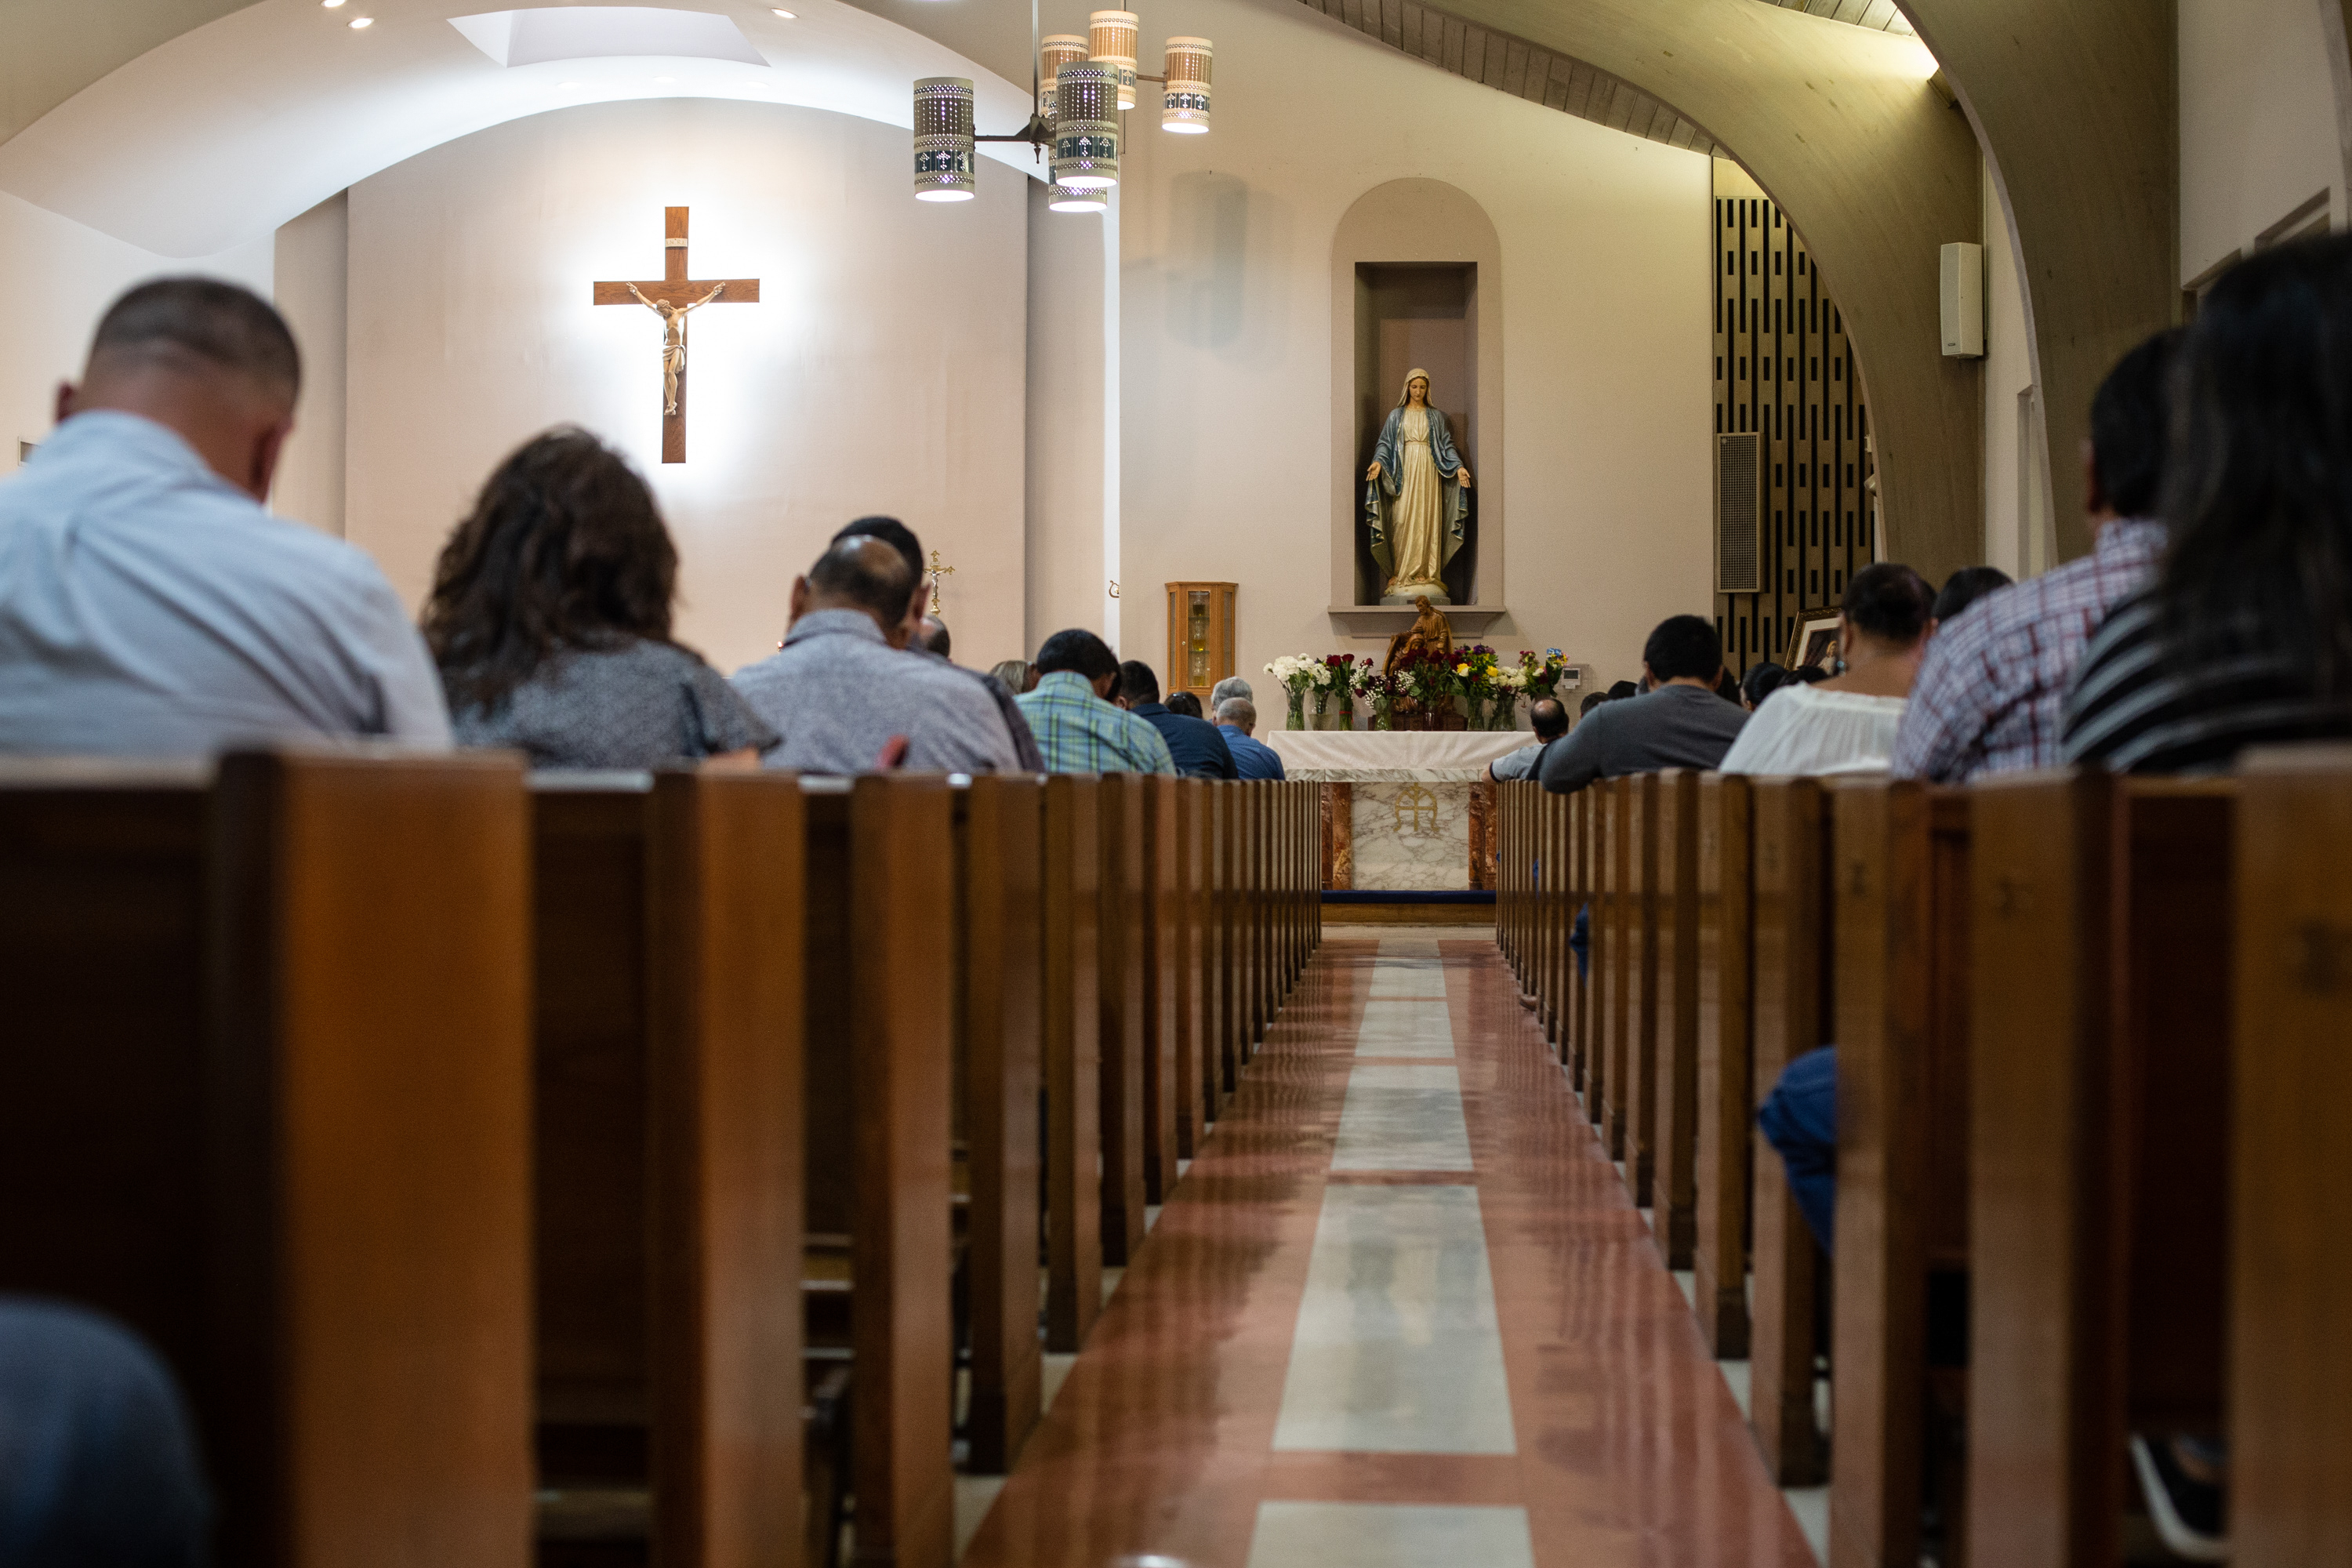 Churchgoers bow their heads in prayer during mass at the Sacred Heart Church in Uvalde on May 29, 2022.